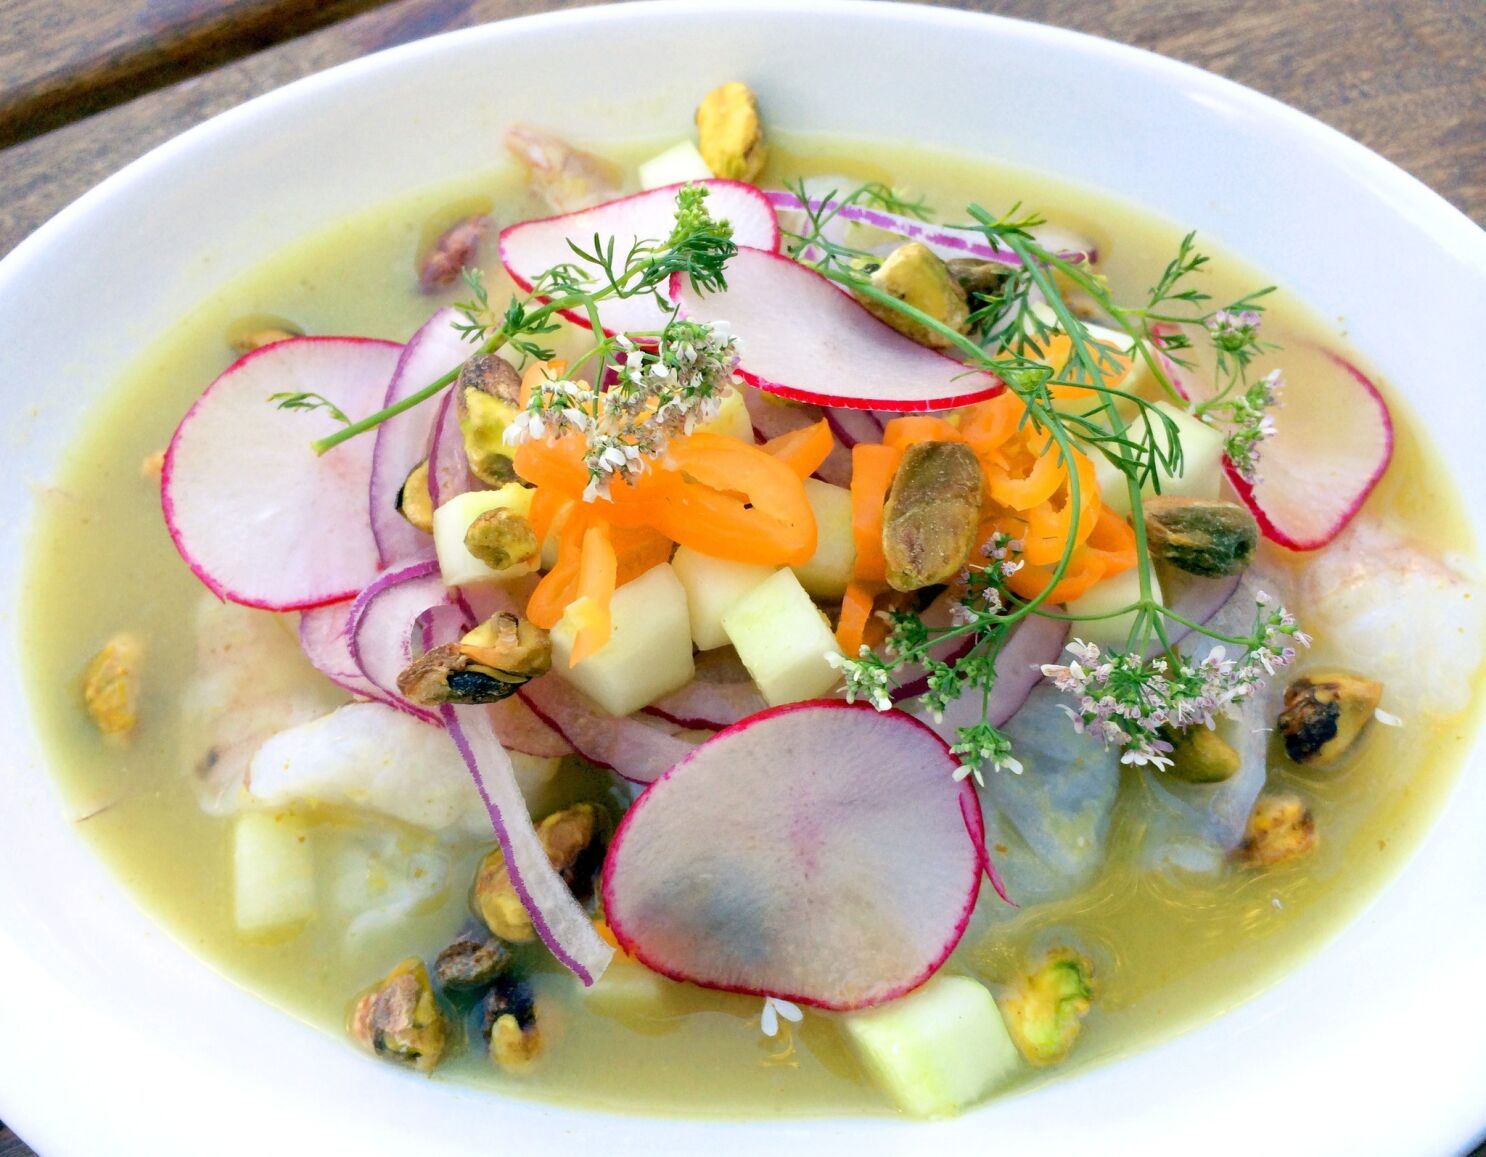 Photos: Ceviche spots in Los Angeles - Los Angeles Times